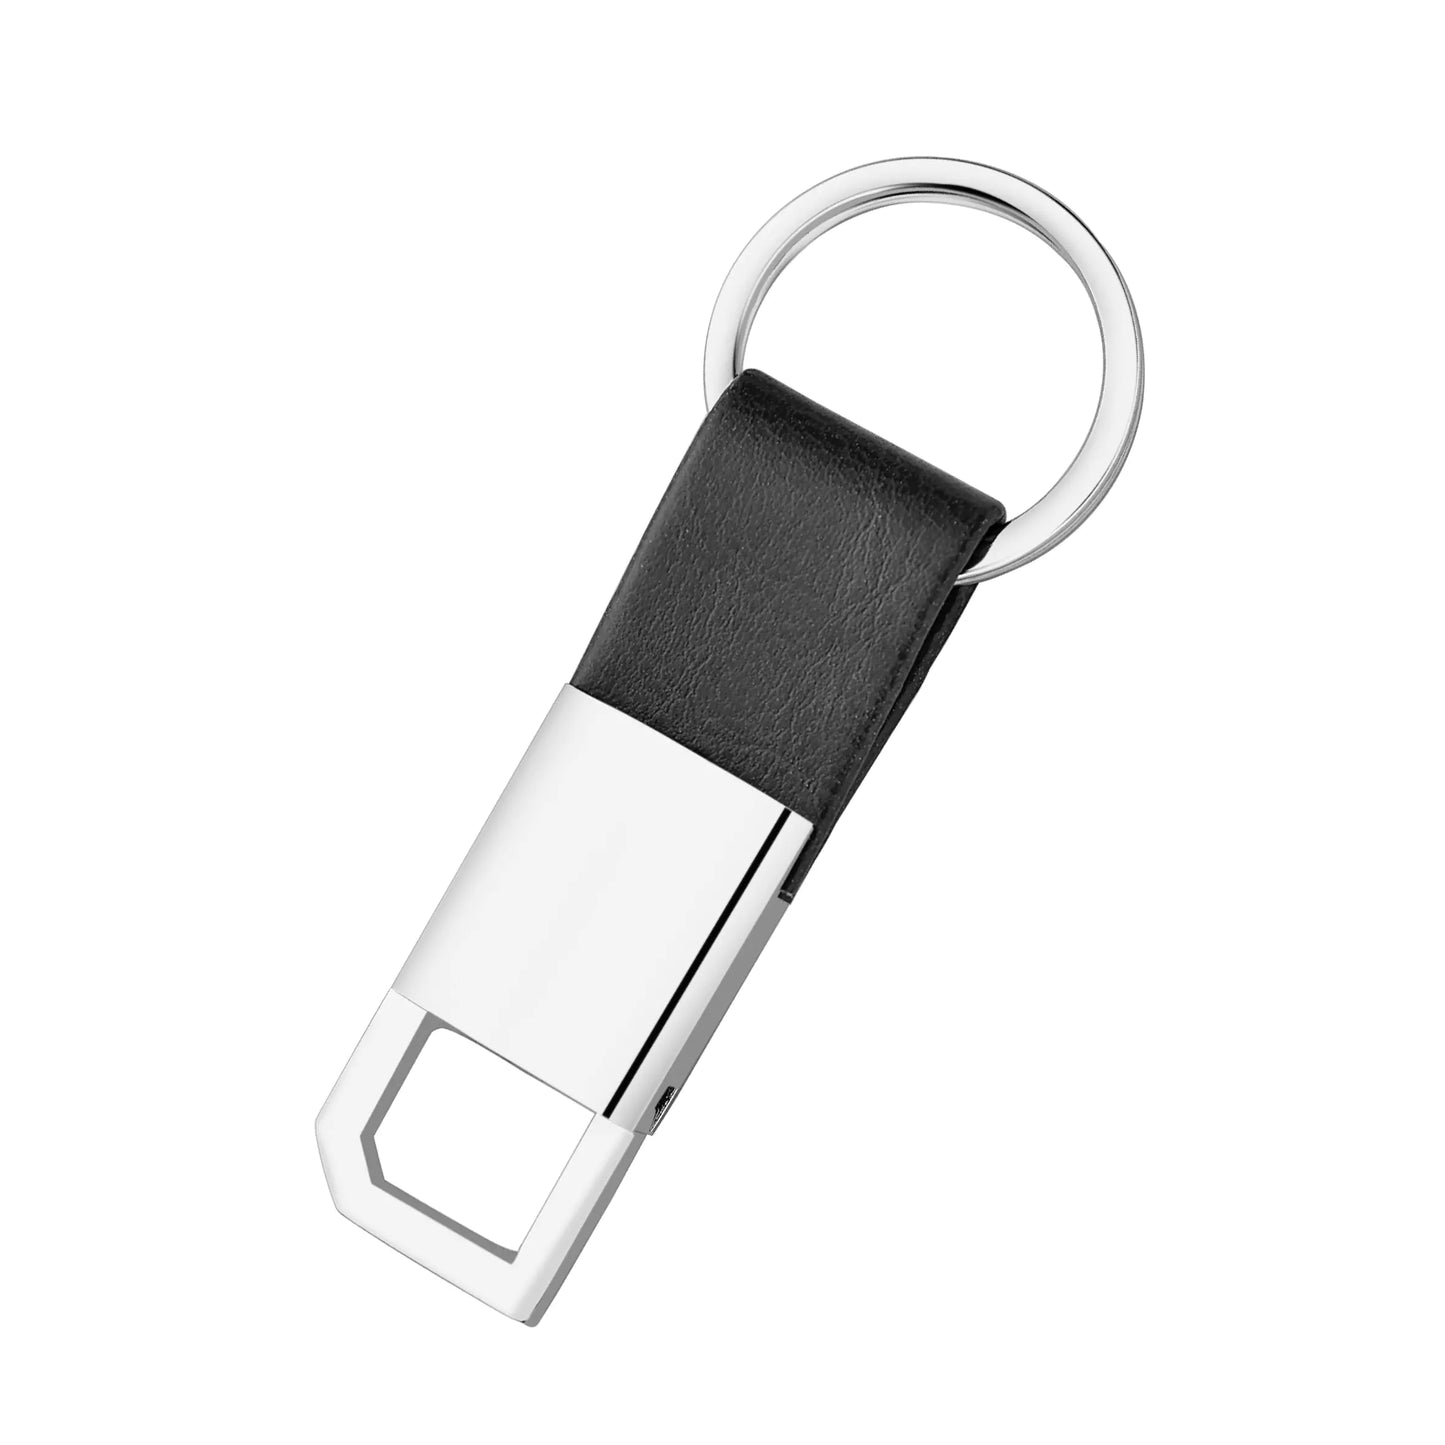 Black Metal Keychain - For Employee, Client, Dealer, or Corporate Gifting, Events Promotional Freebie JKC10